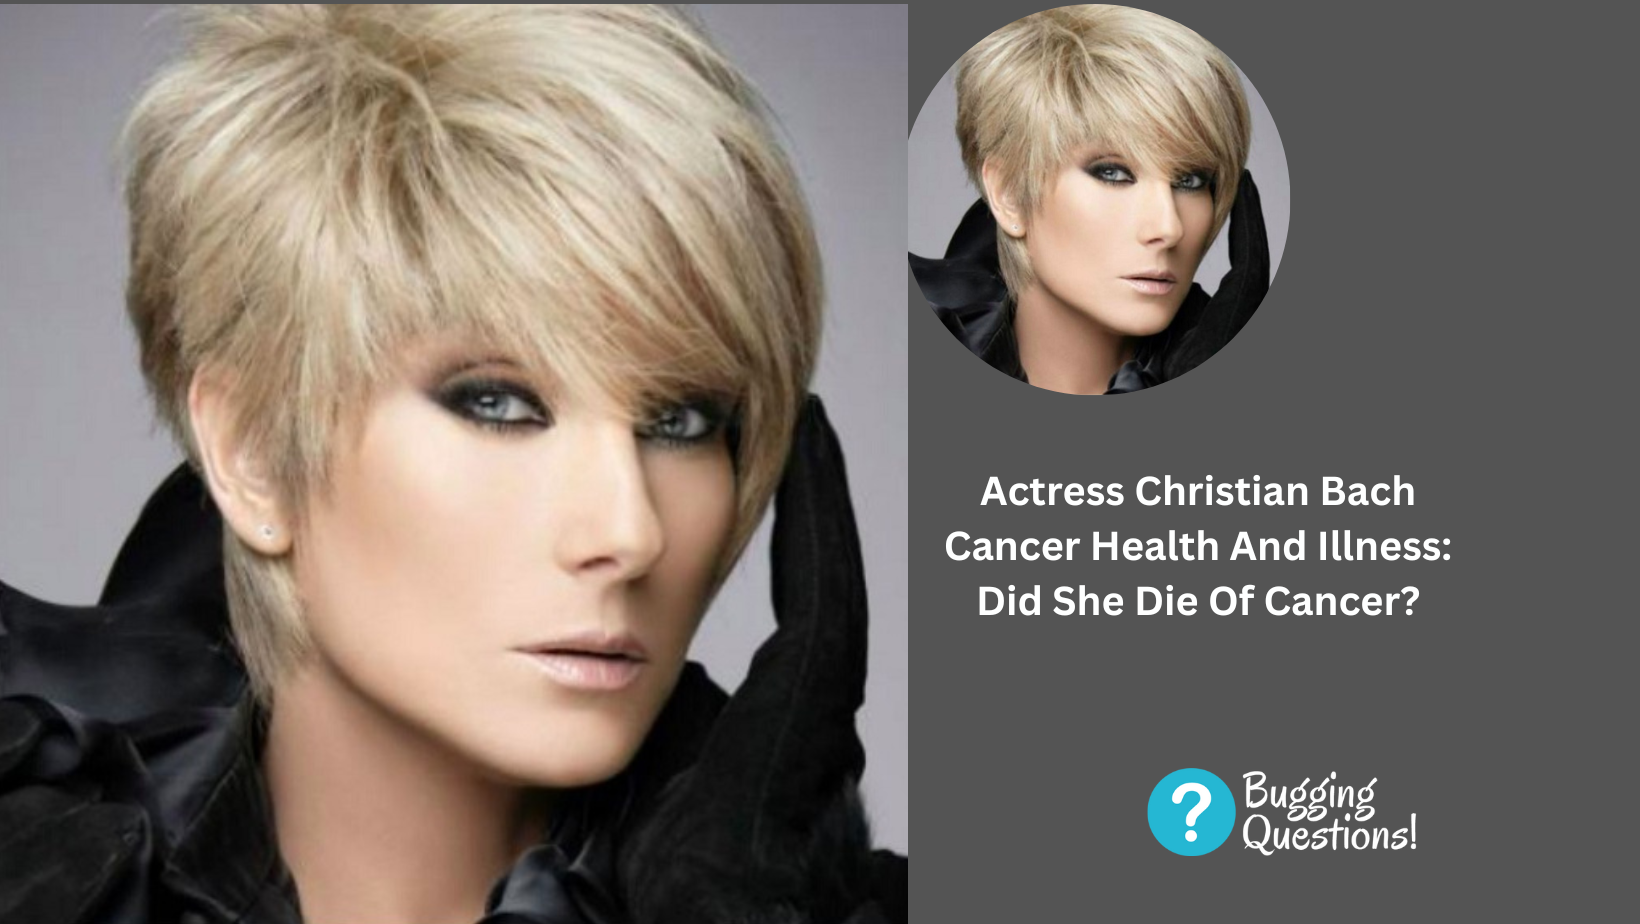 Actress Christian Bach Cancer Health And Illness: Did She Die Of Cancer?